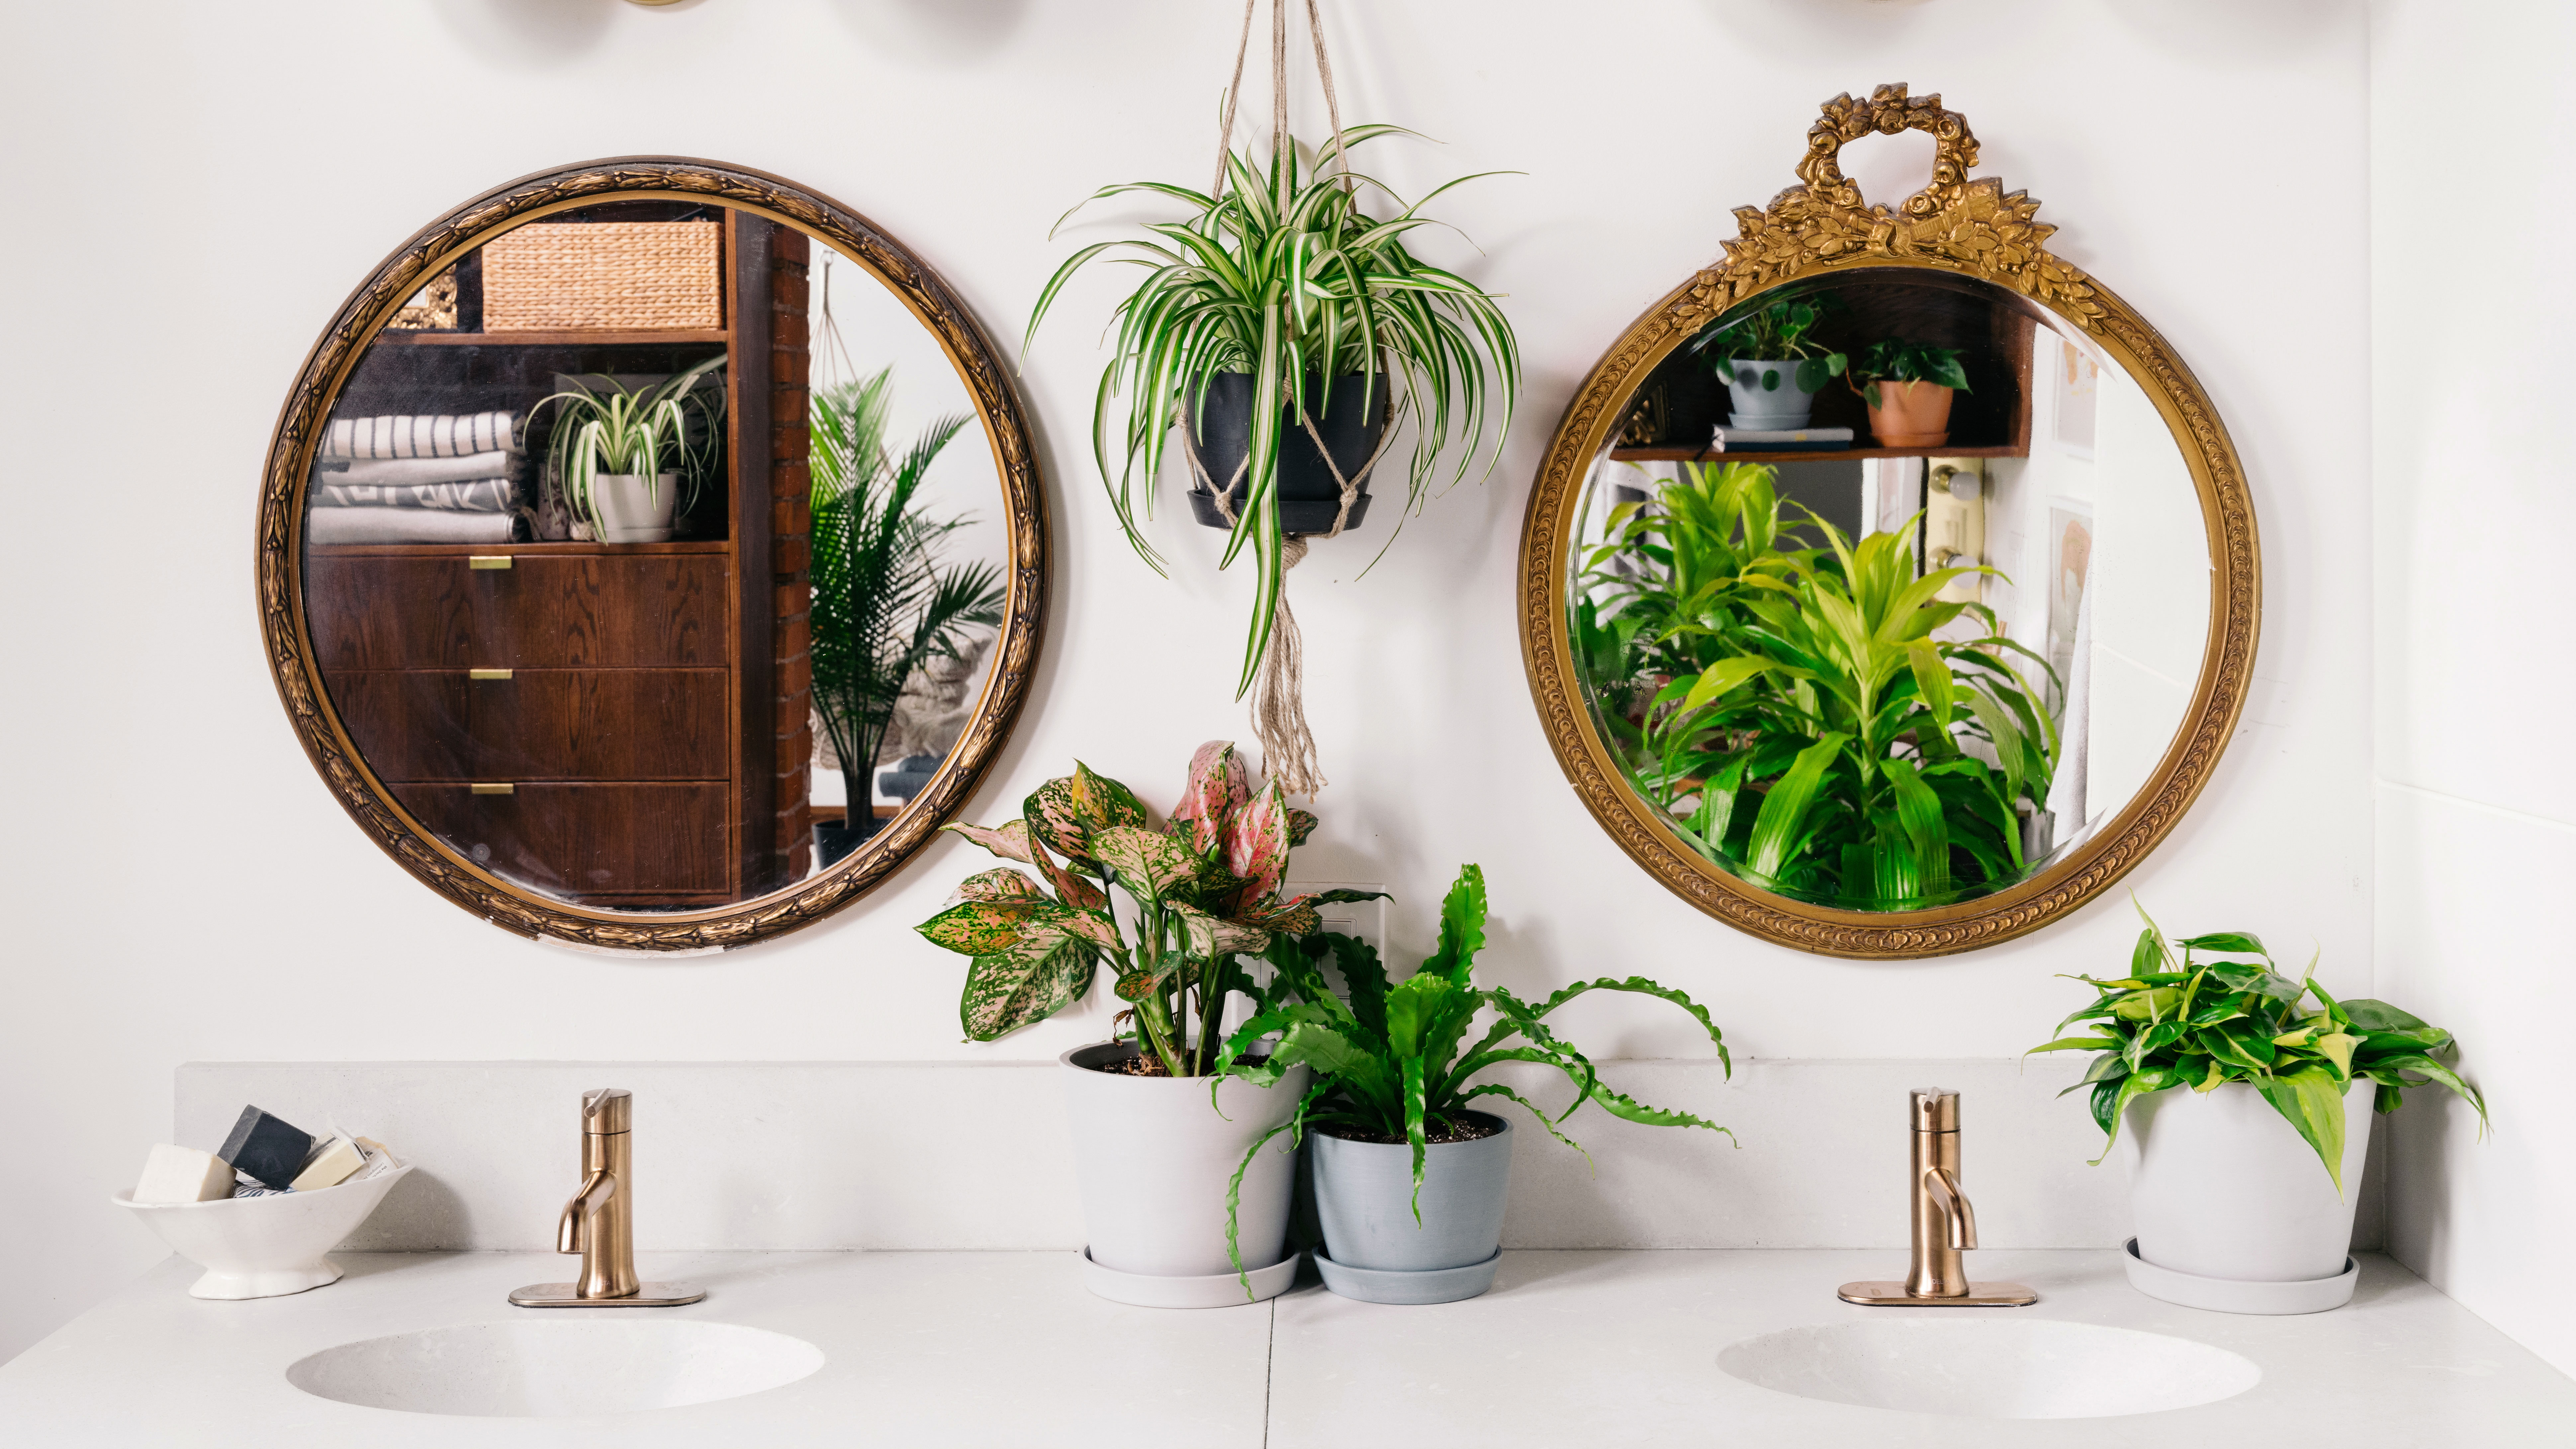 Best bathroom plants: 10 that in humid environments